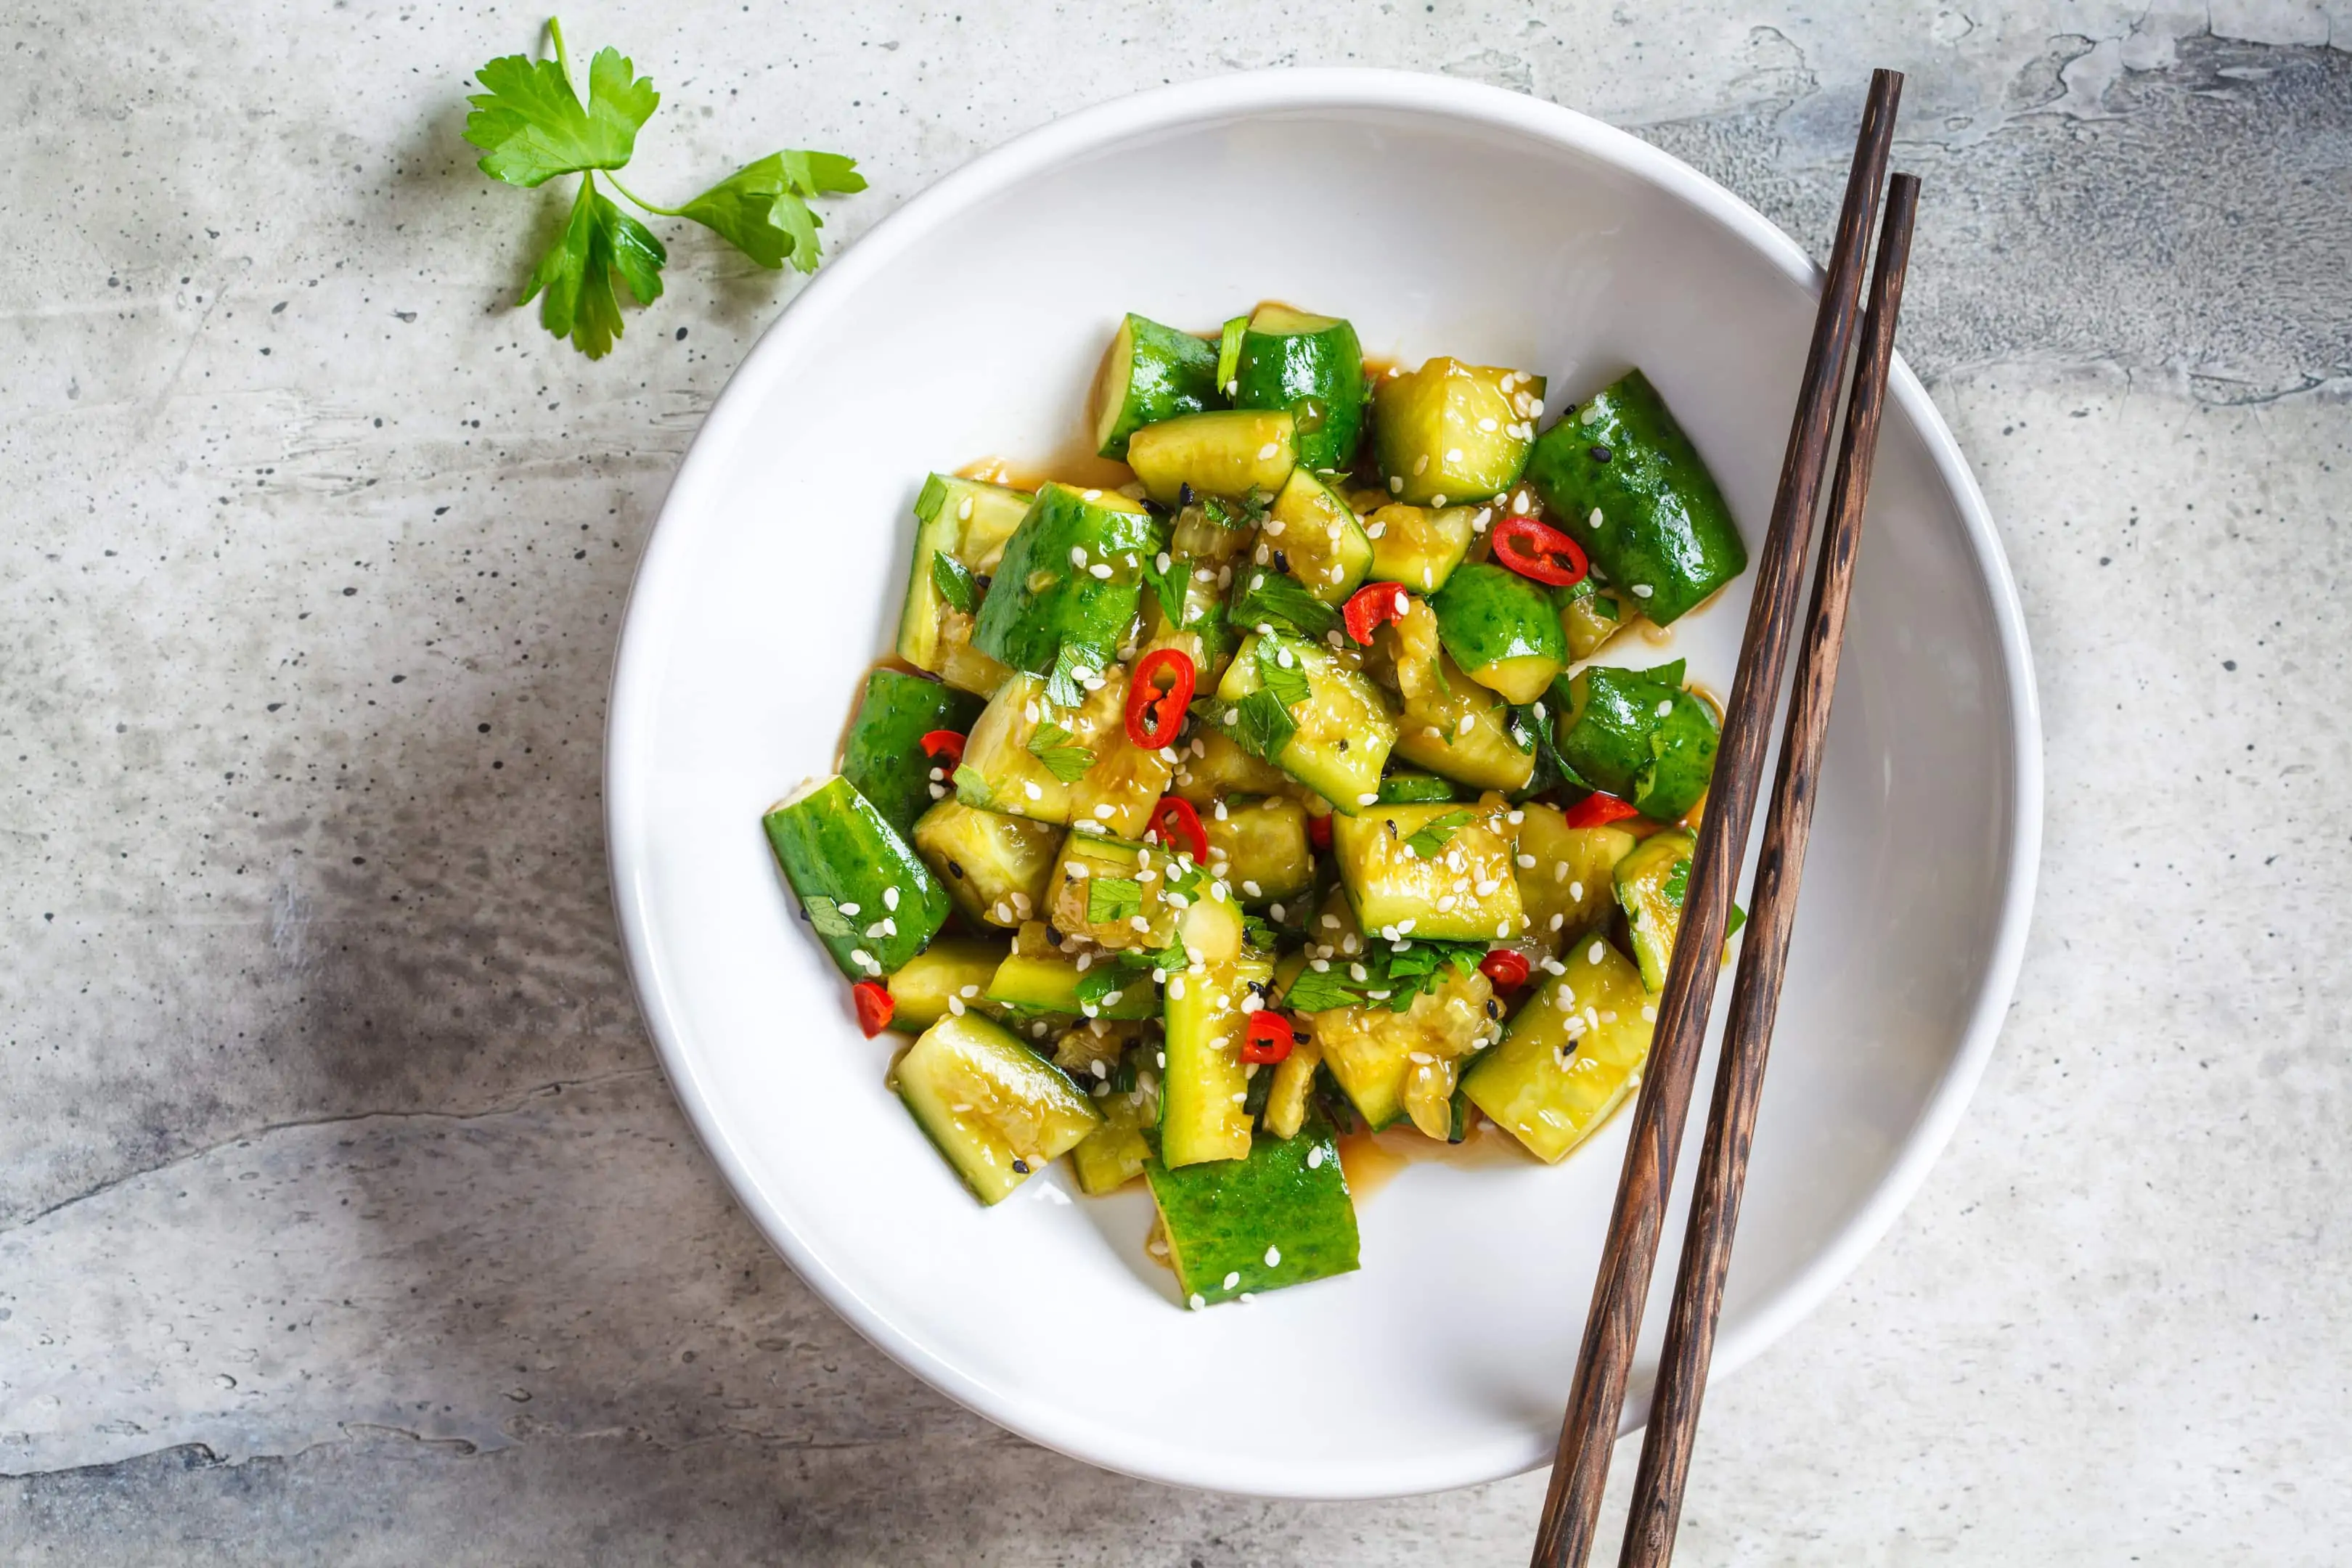 Din Tai Fung cucumber salad recipe with chili and sesame seeds